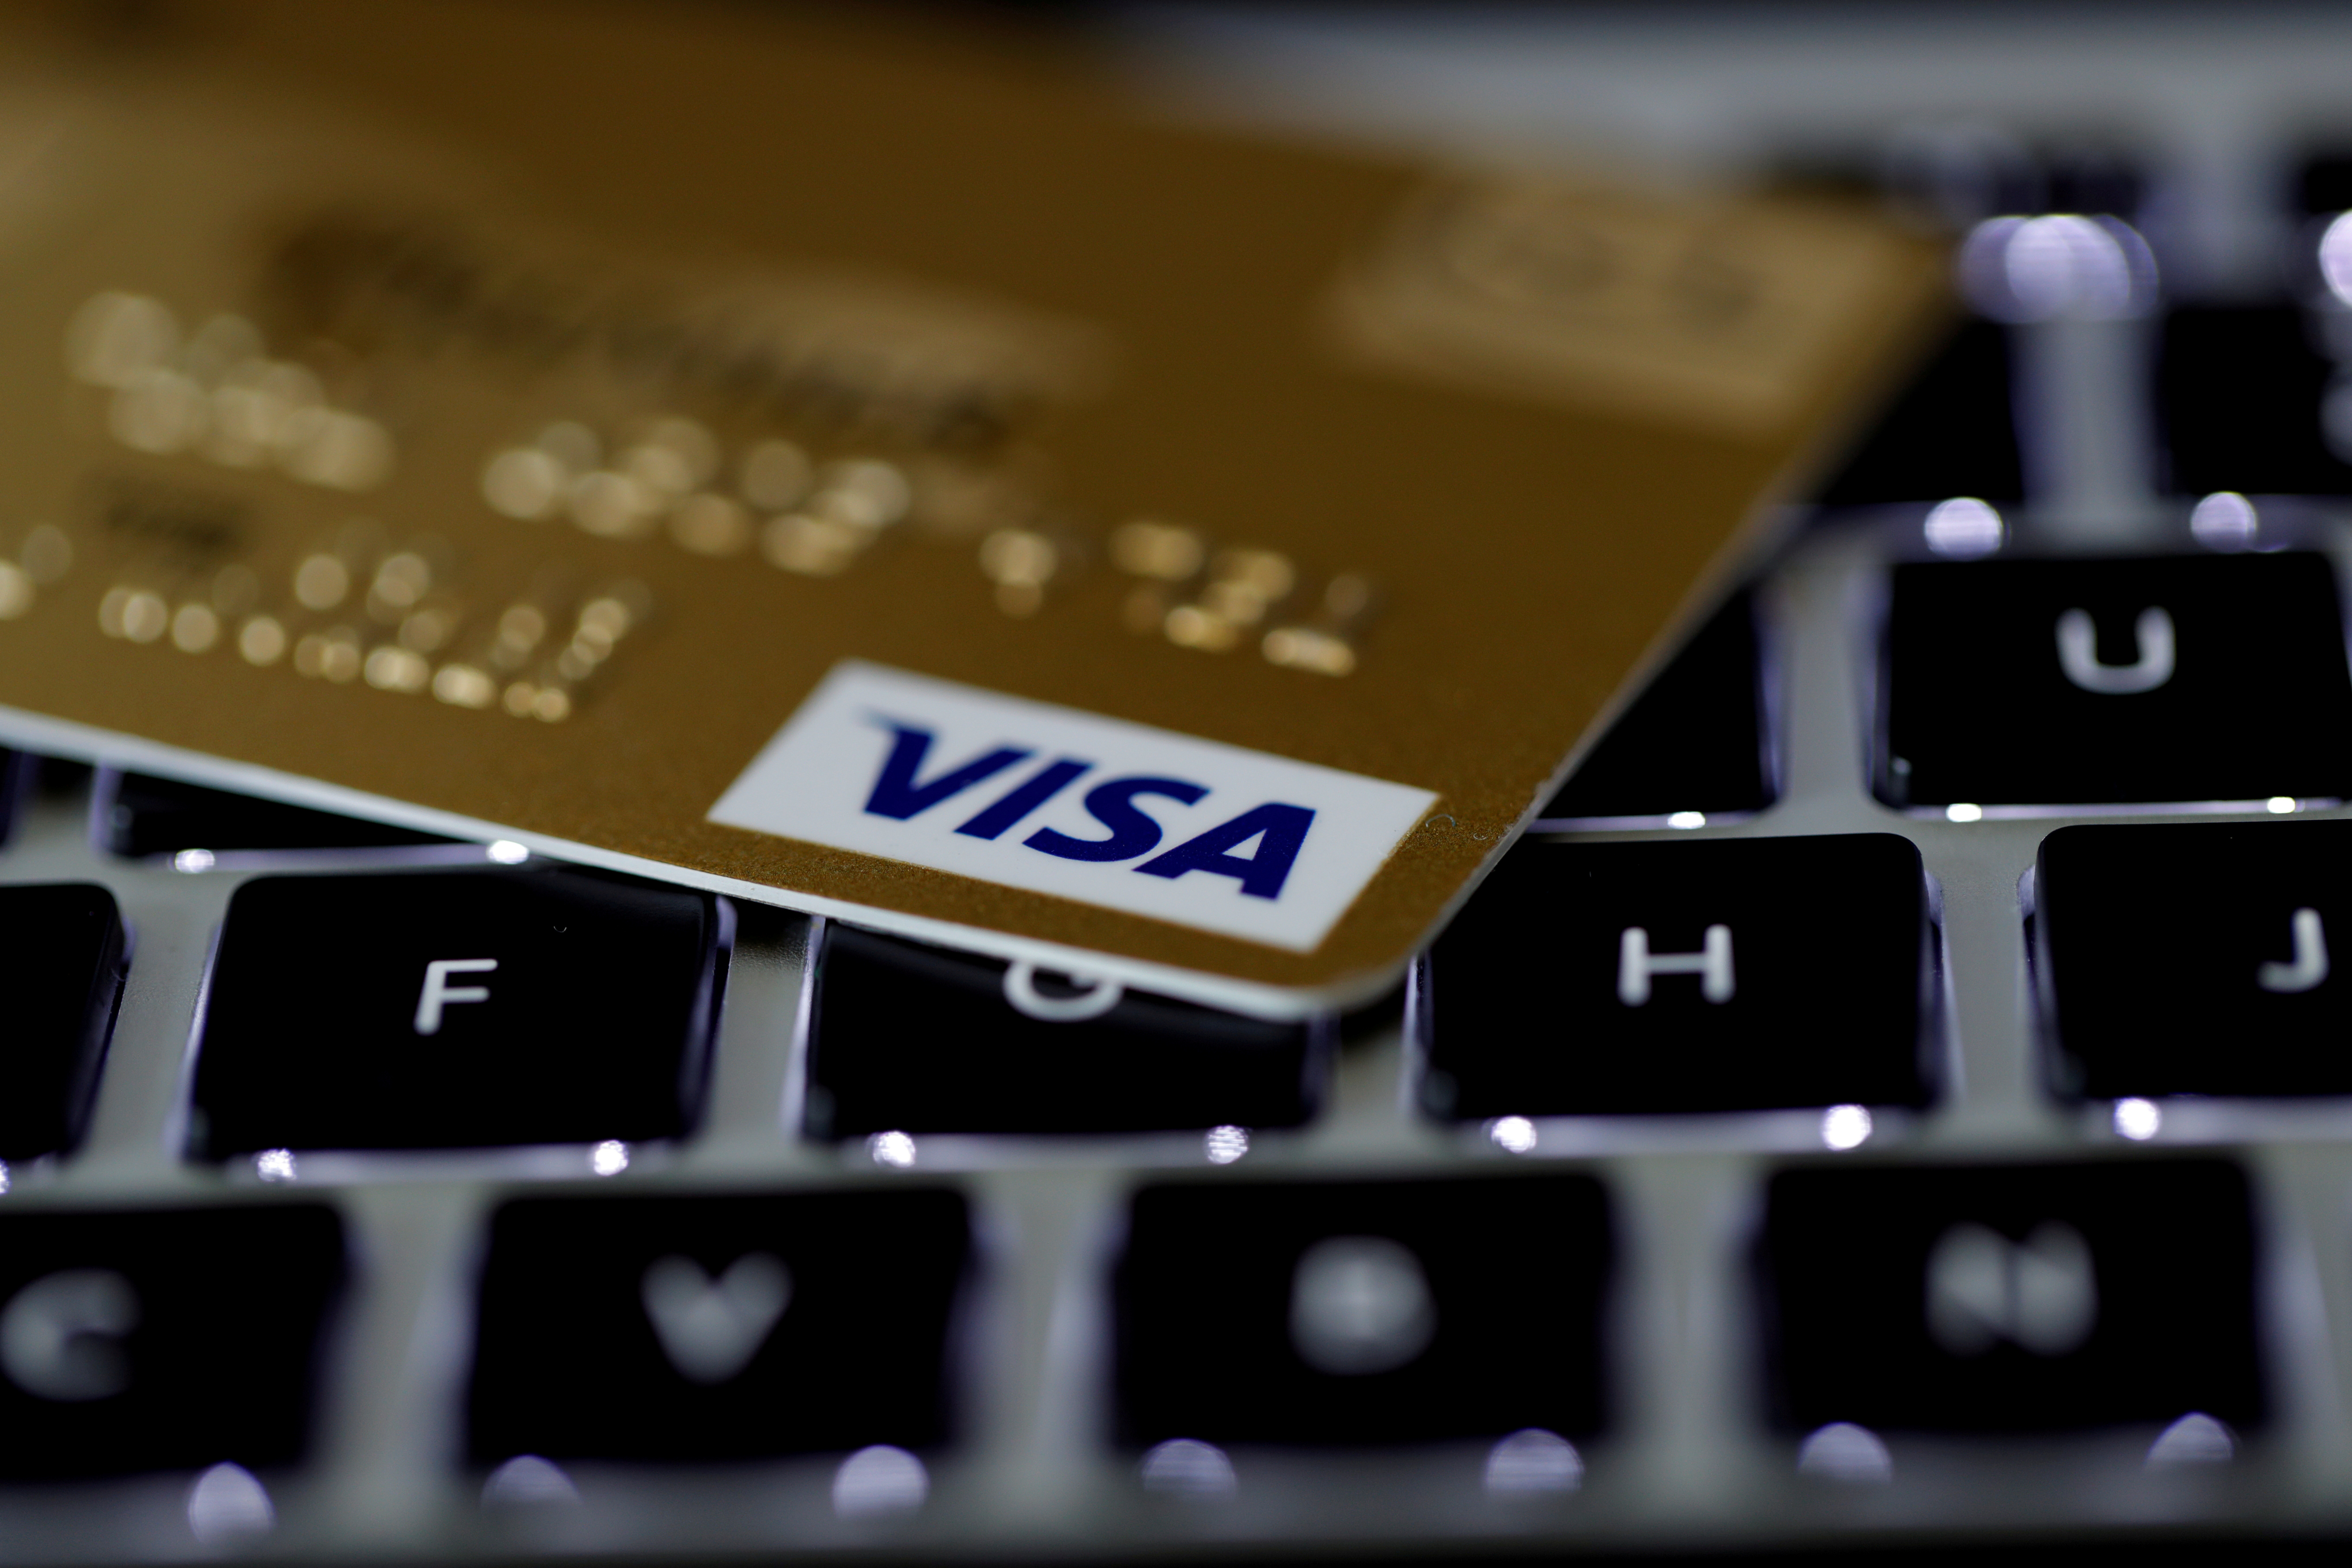 FILE PHOTO: A Visa credit card is seen on a computer keyboard in this picture illustration